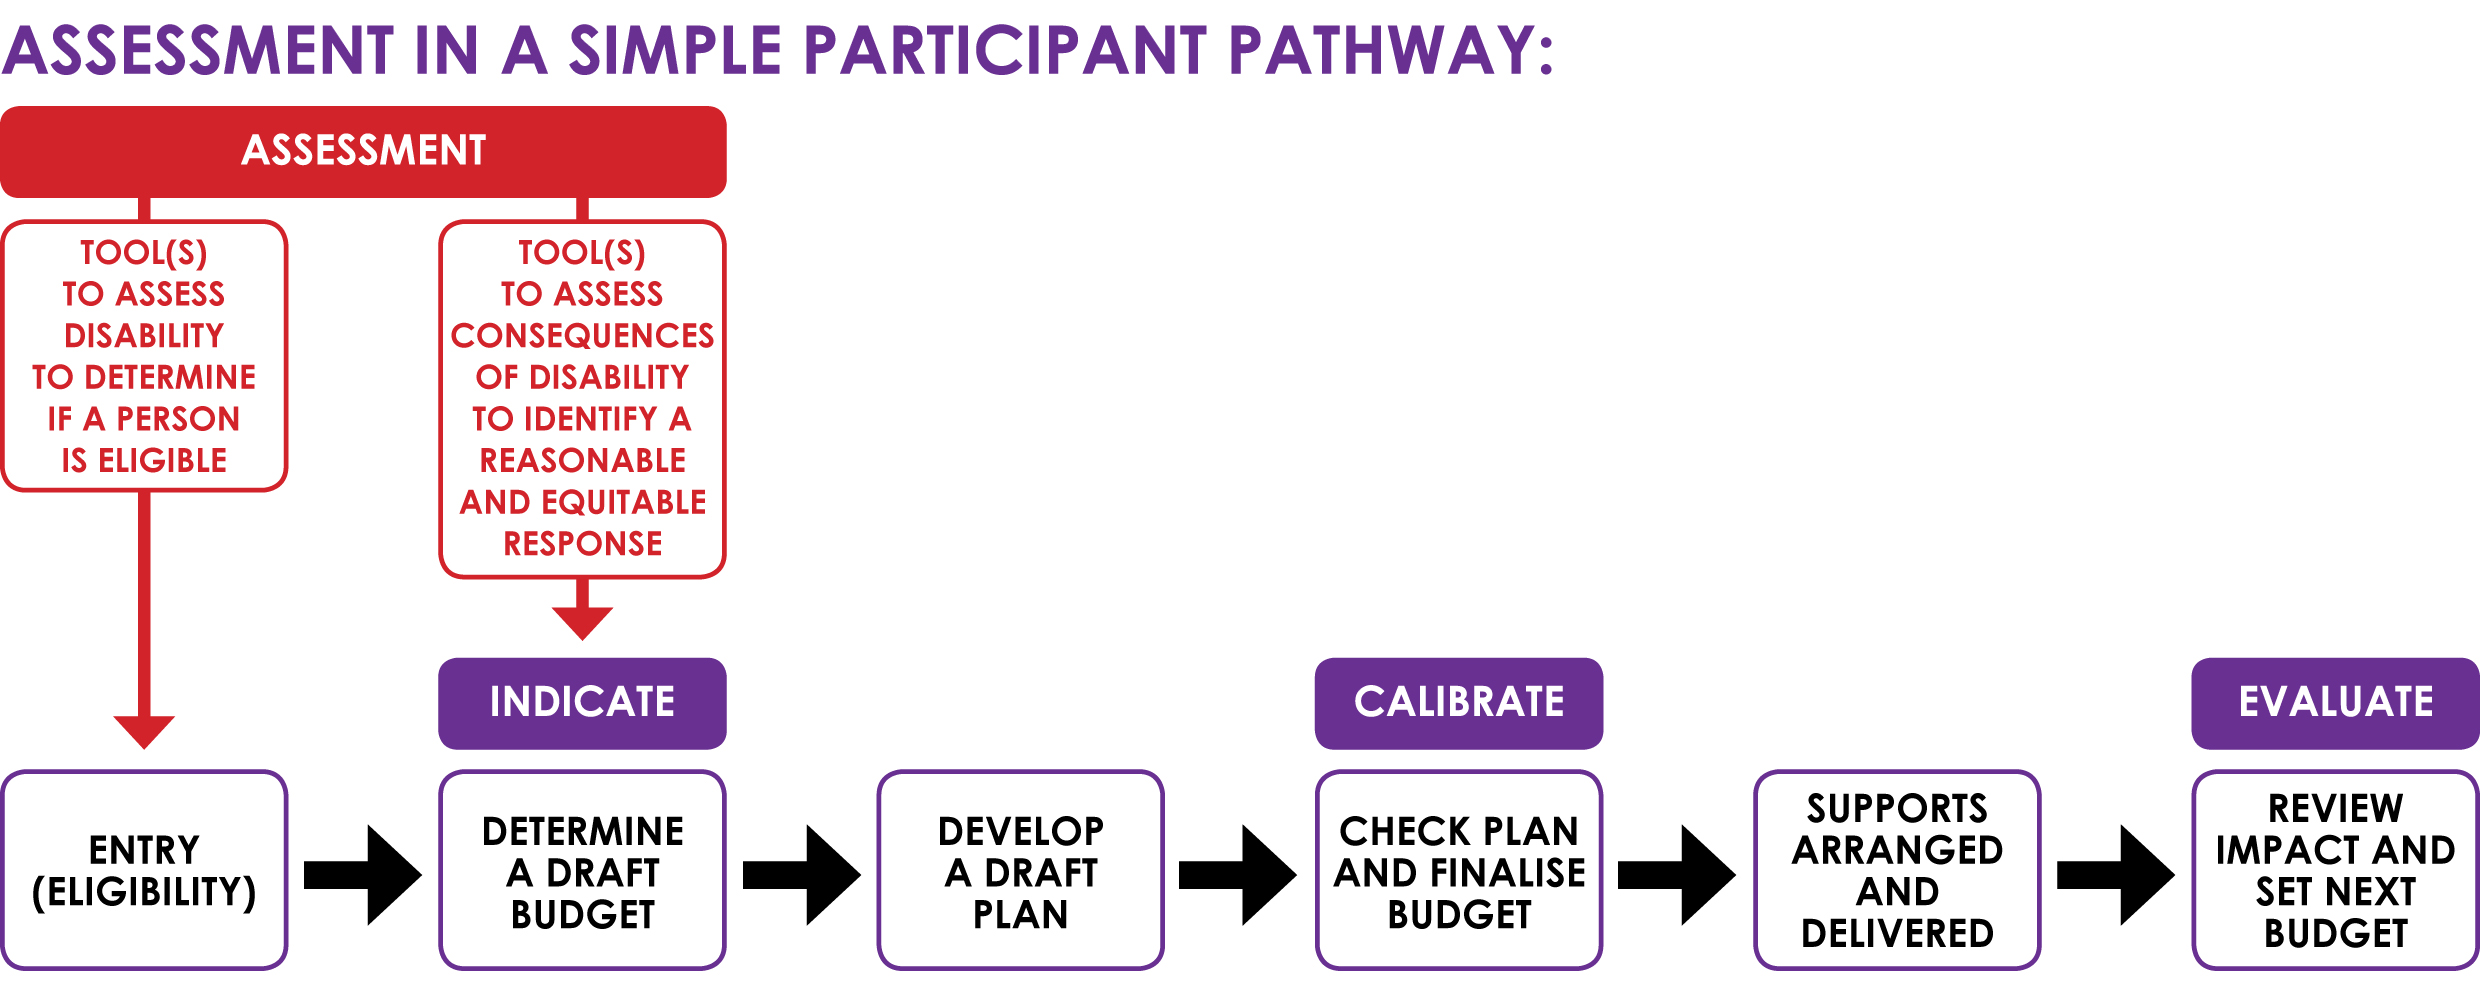 Flowchart of assessment in a simple participant pathway.